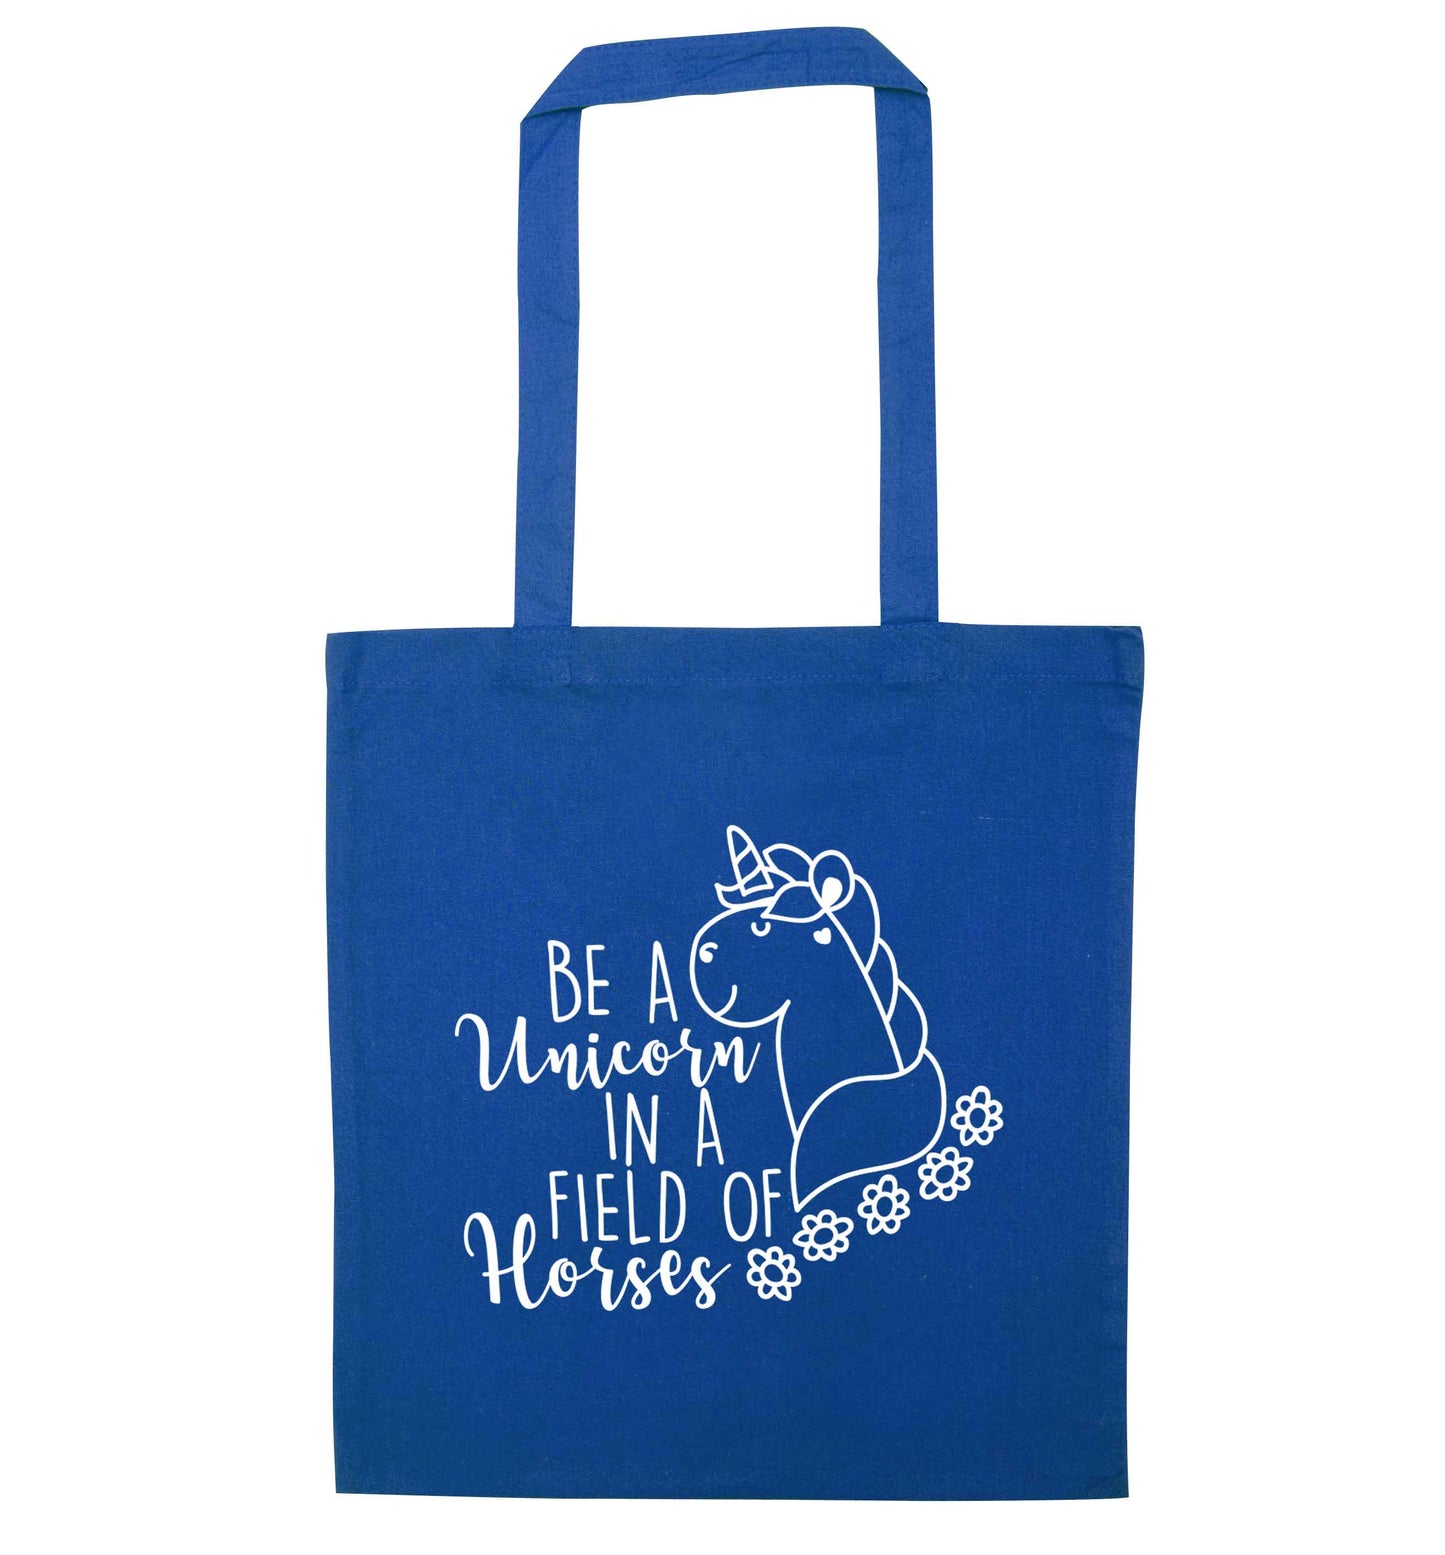 Be a unicorn in a field of horses blue tote bag